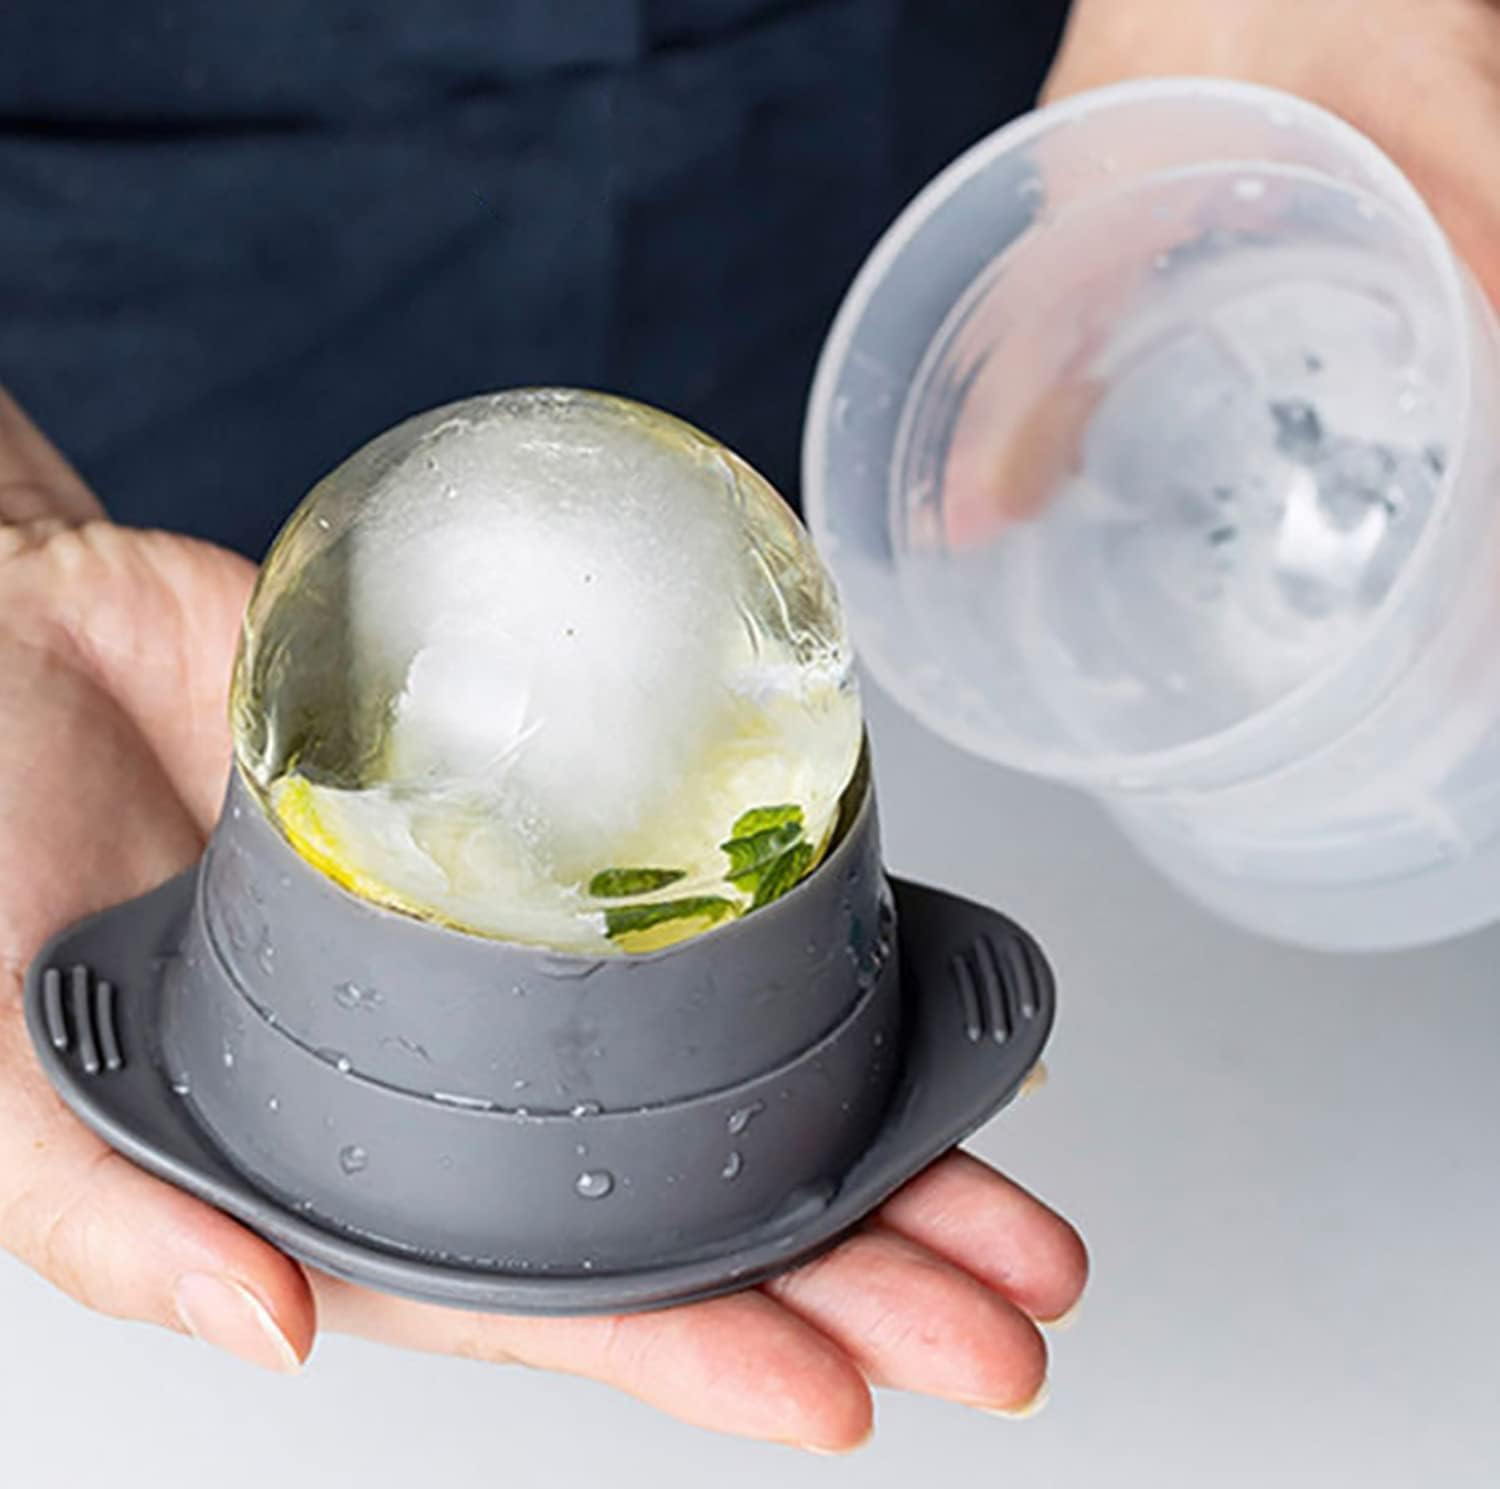 Round Ice Ball Maker of Ice Mold bar large ice ball for chilling beverages, Cocktails, and juices in summer